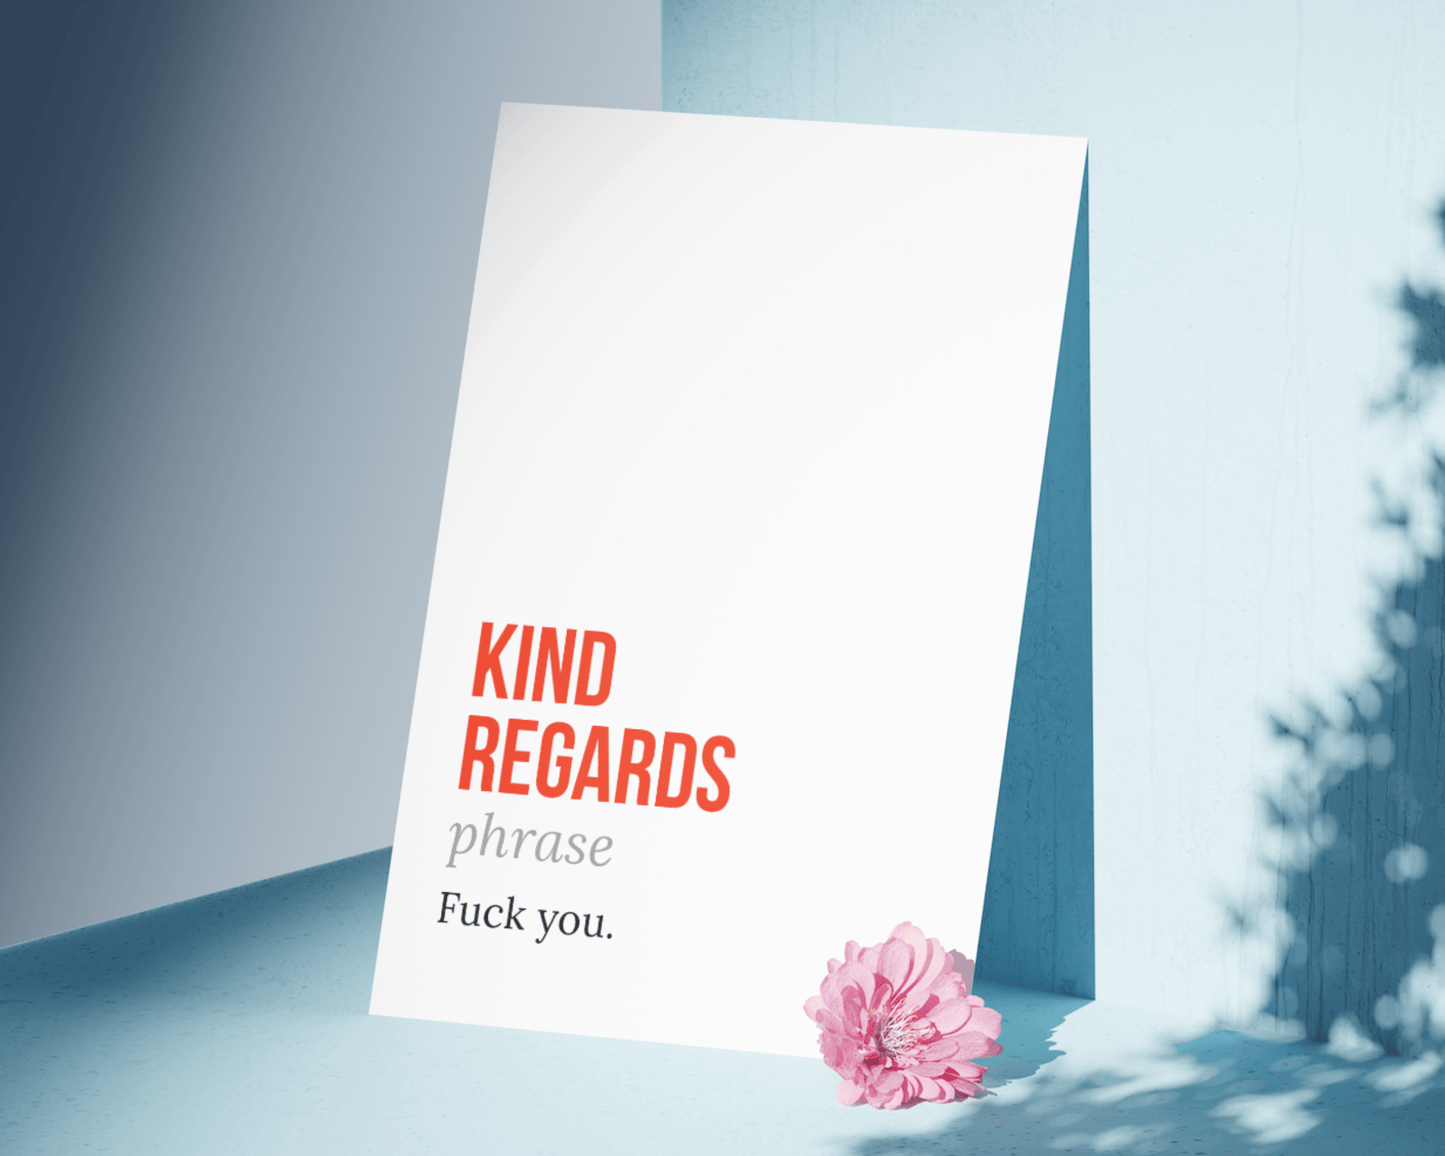 Funny Kind Regards Definition Work Office Print Prints Moments That Unite